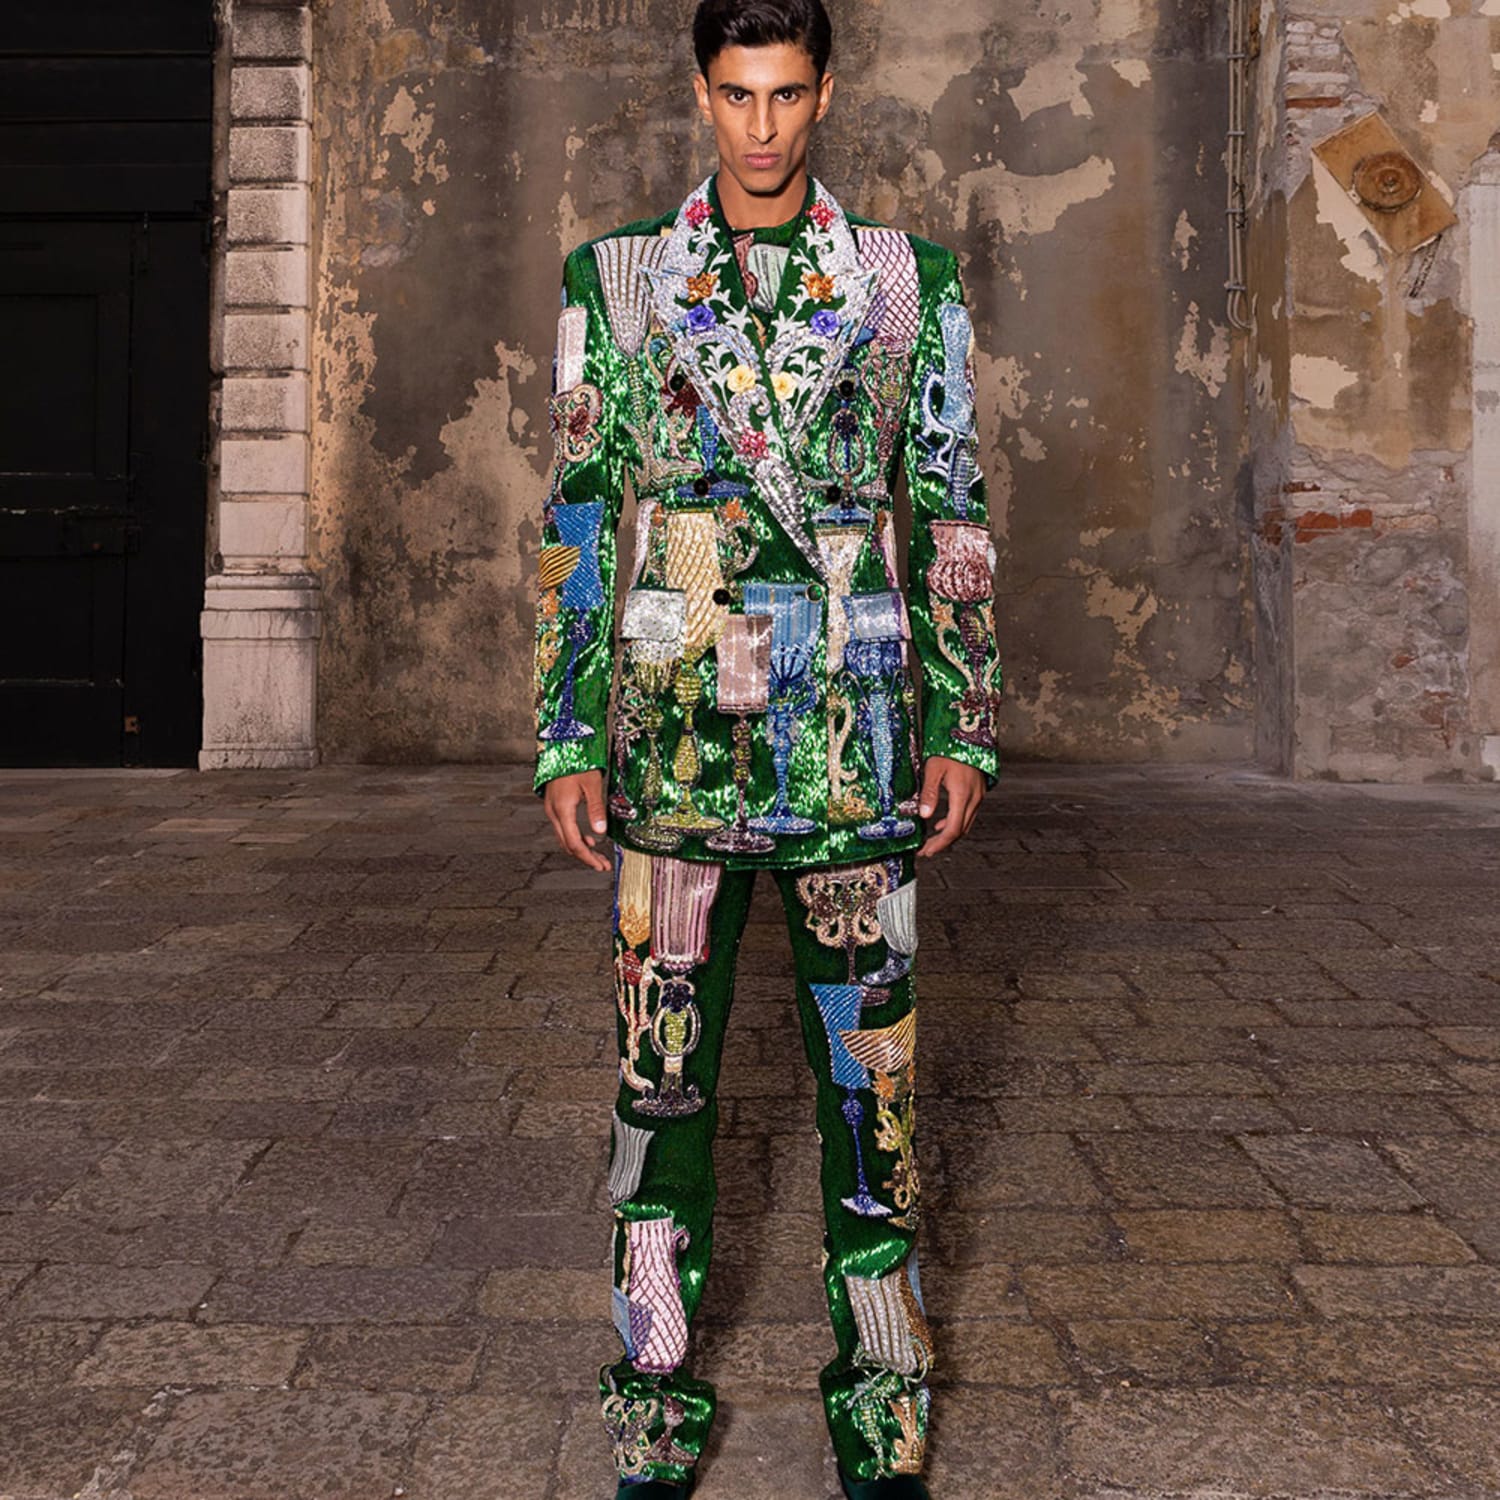 One of the NFTs auctioned by Dolce & Gabbana in October. Credit: UNXD and Dolce & Gabbana